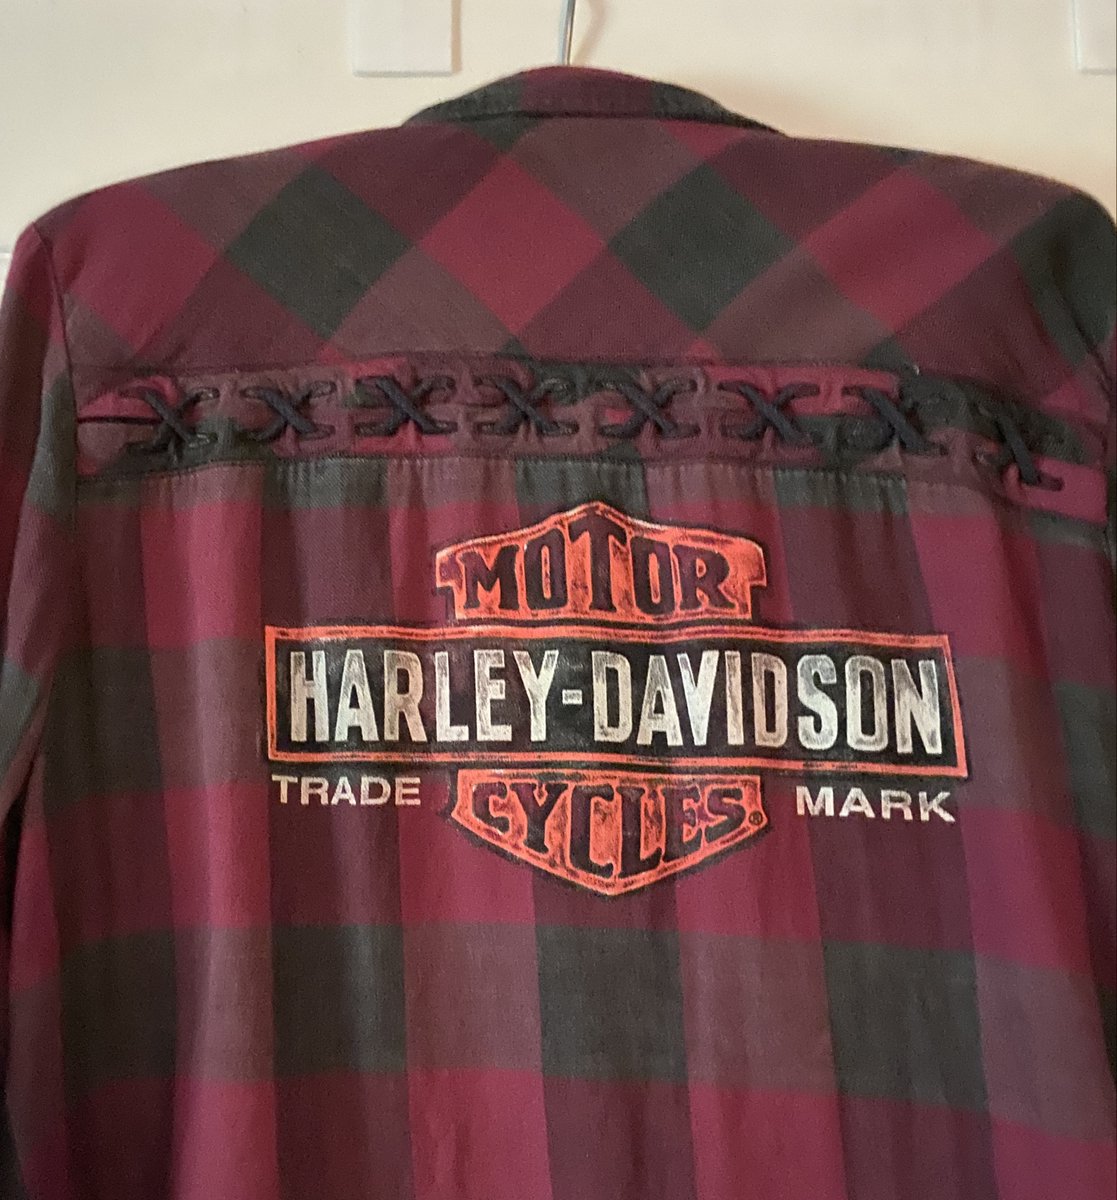 Wearing this today…a nod to sisters & brothers riding to and fro #PortDover #Friday13th😎🏍️✌🏻#ridesafe